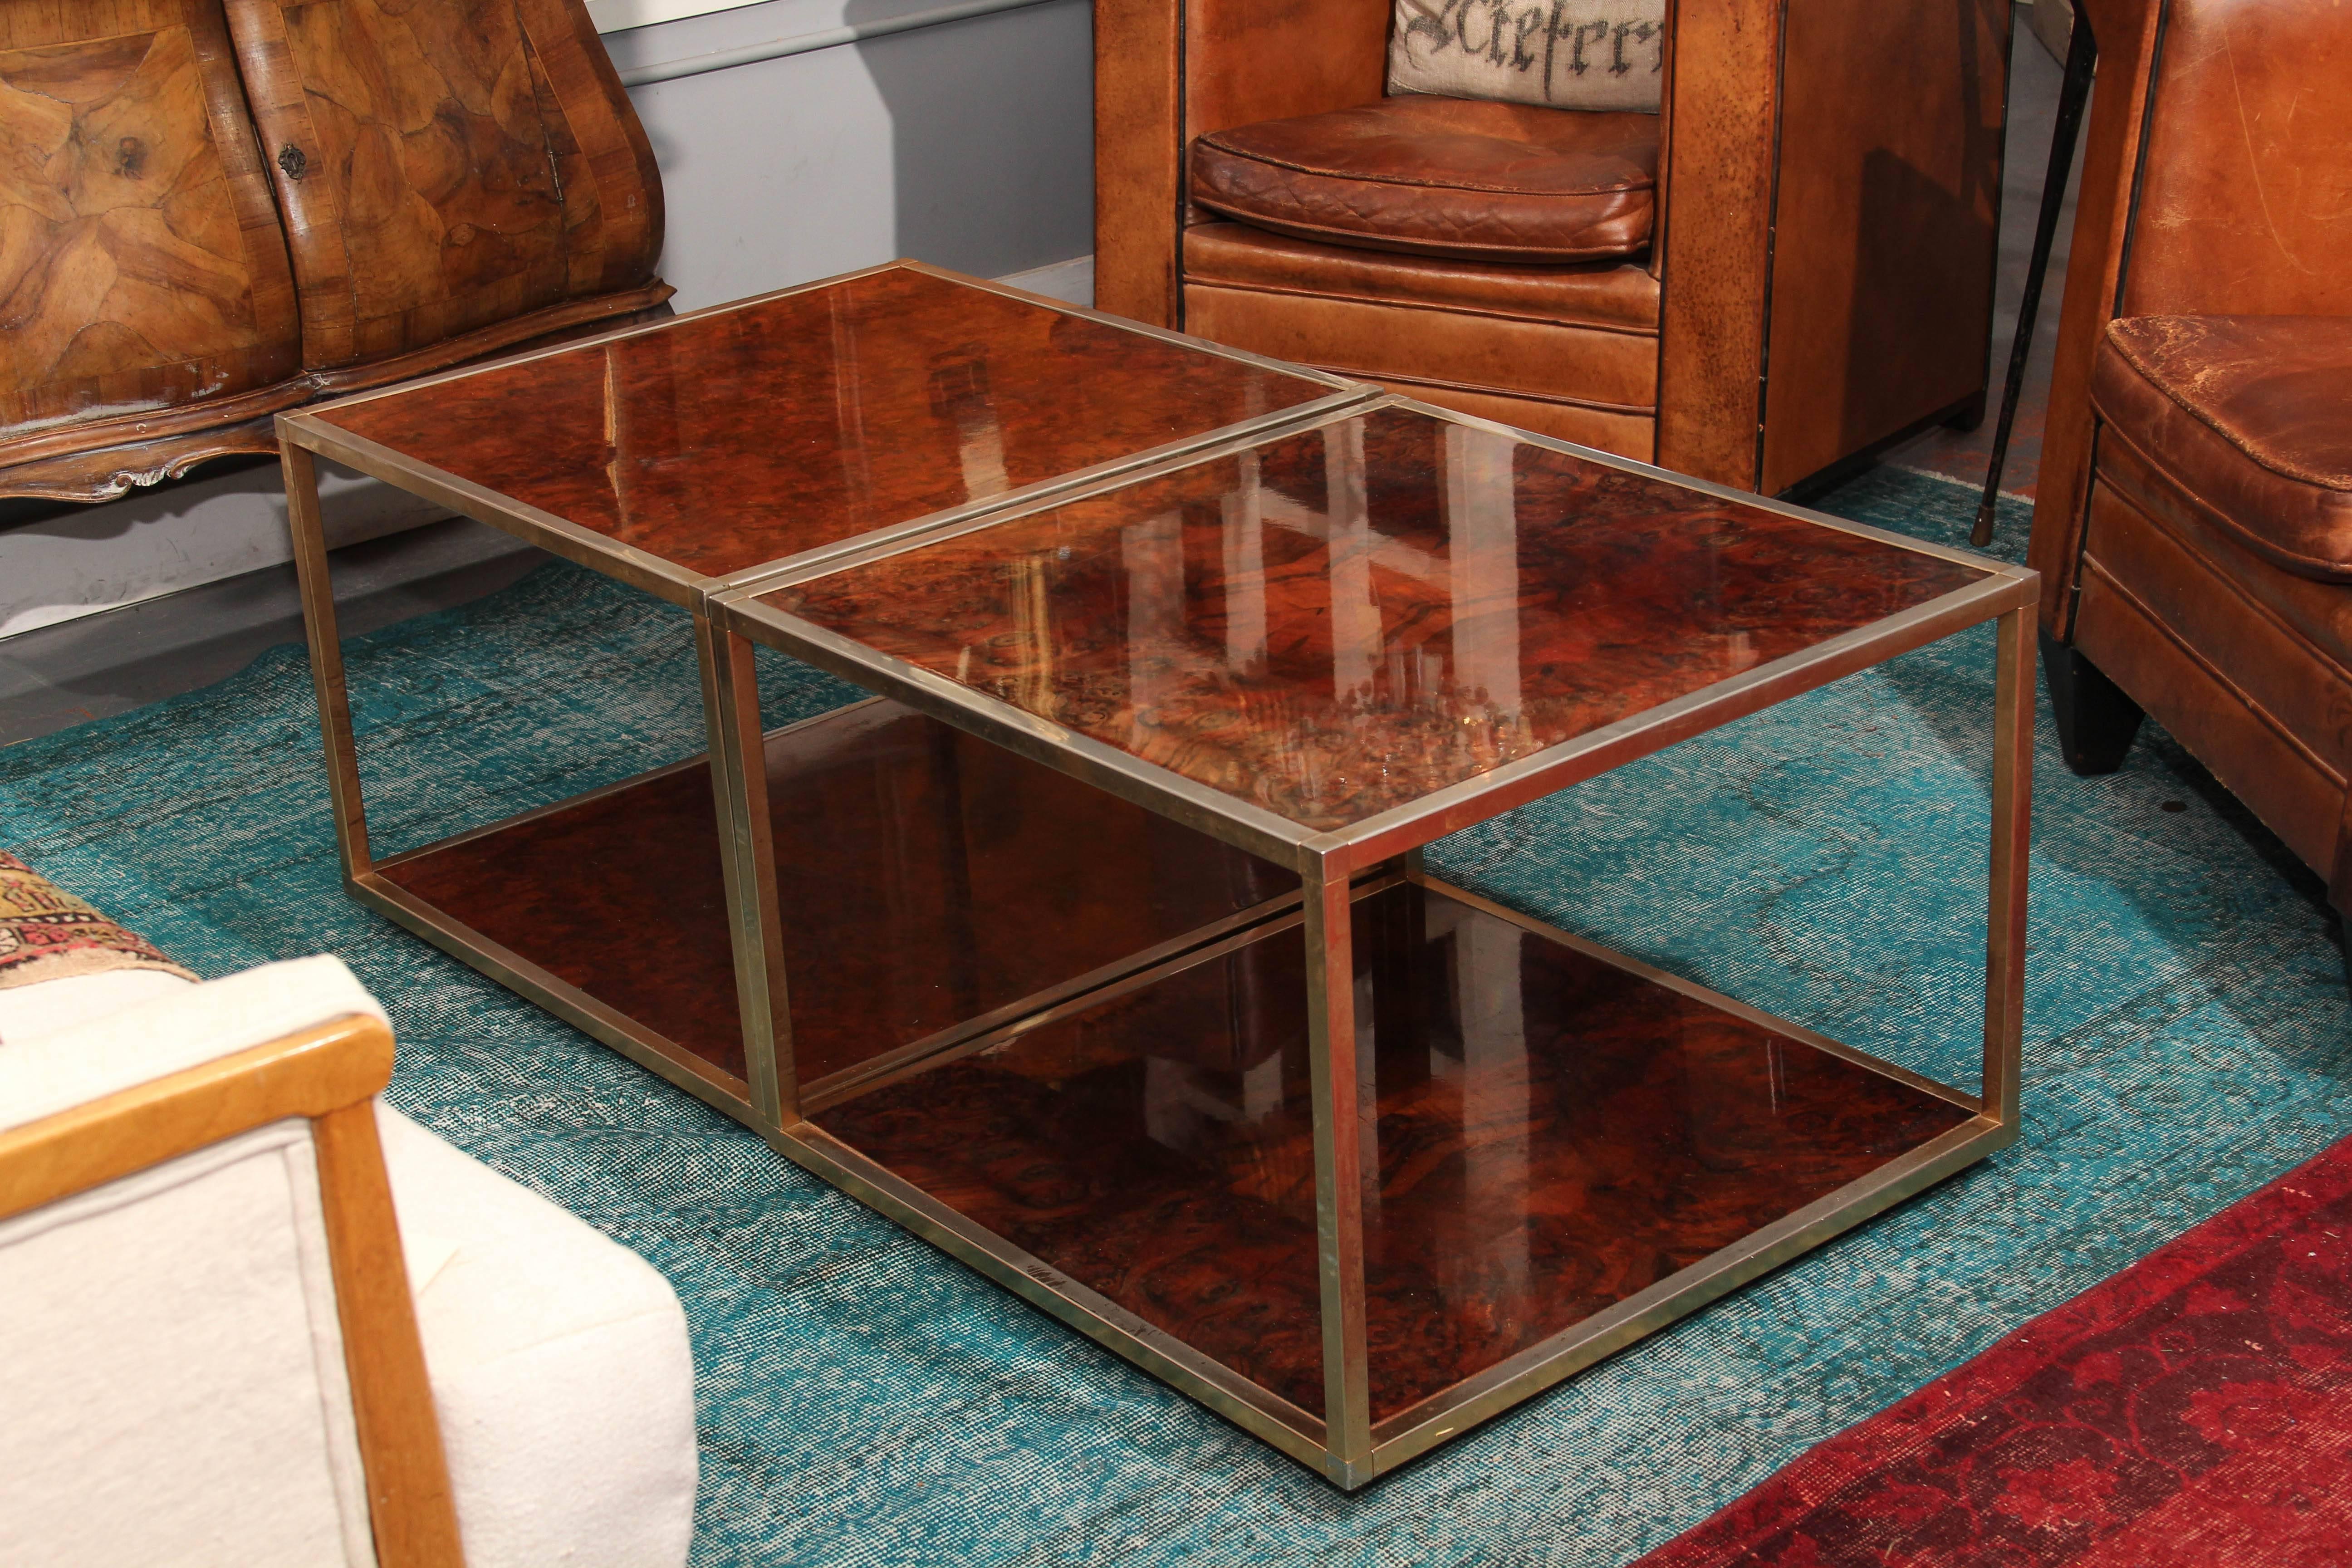 A matched pair of olivewood and gilt metal low tables in a simple yet beautiful square surface shape and the perfect cocktail table height.